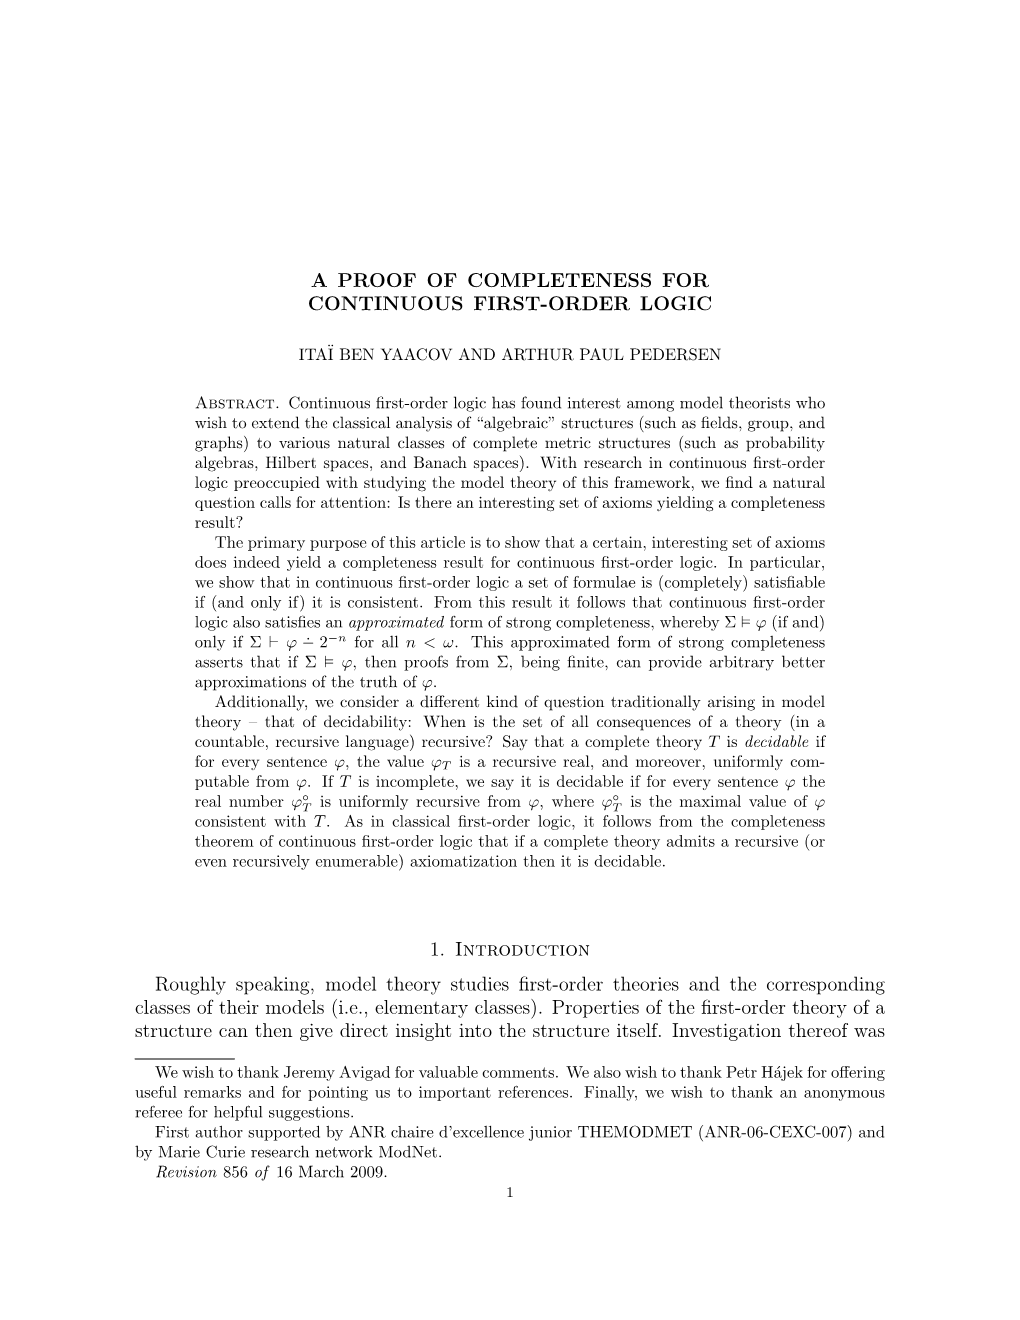 A Proof of Completeness for Continuous First-Order Logic